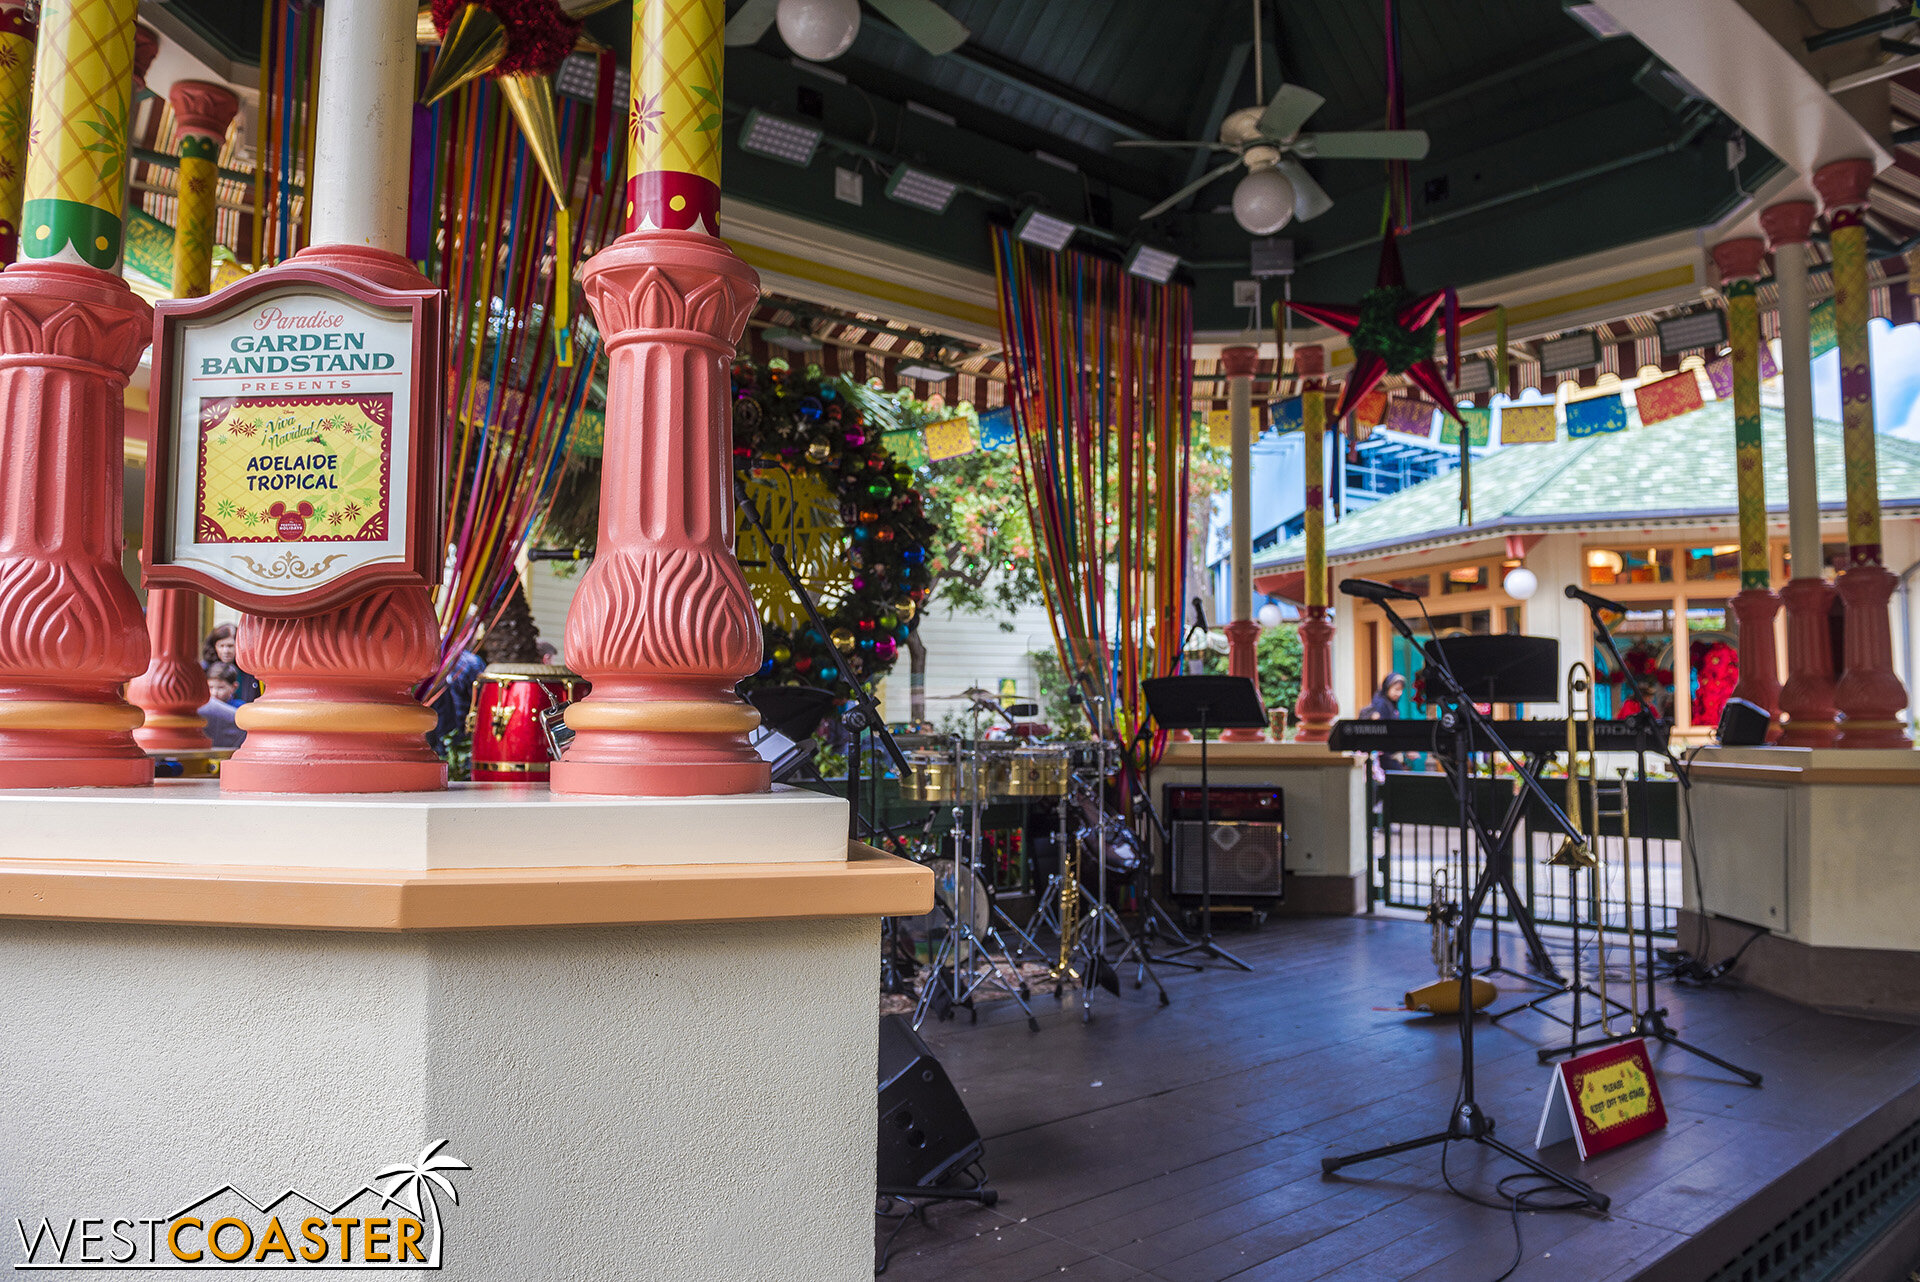  The Paradise Garden Bandstand also features performances by select artists. 